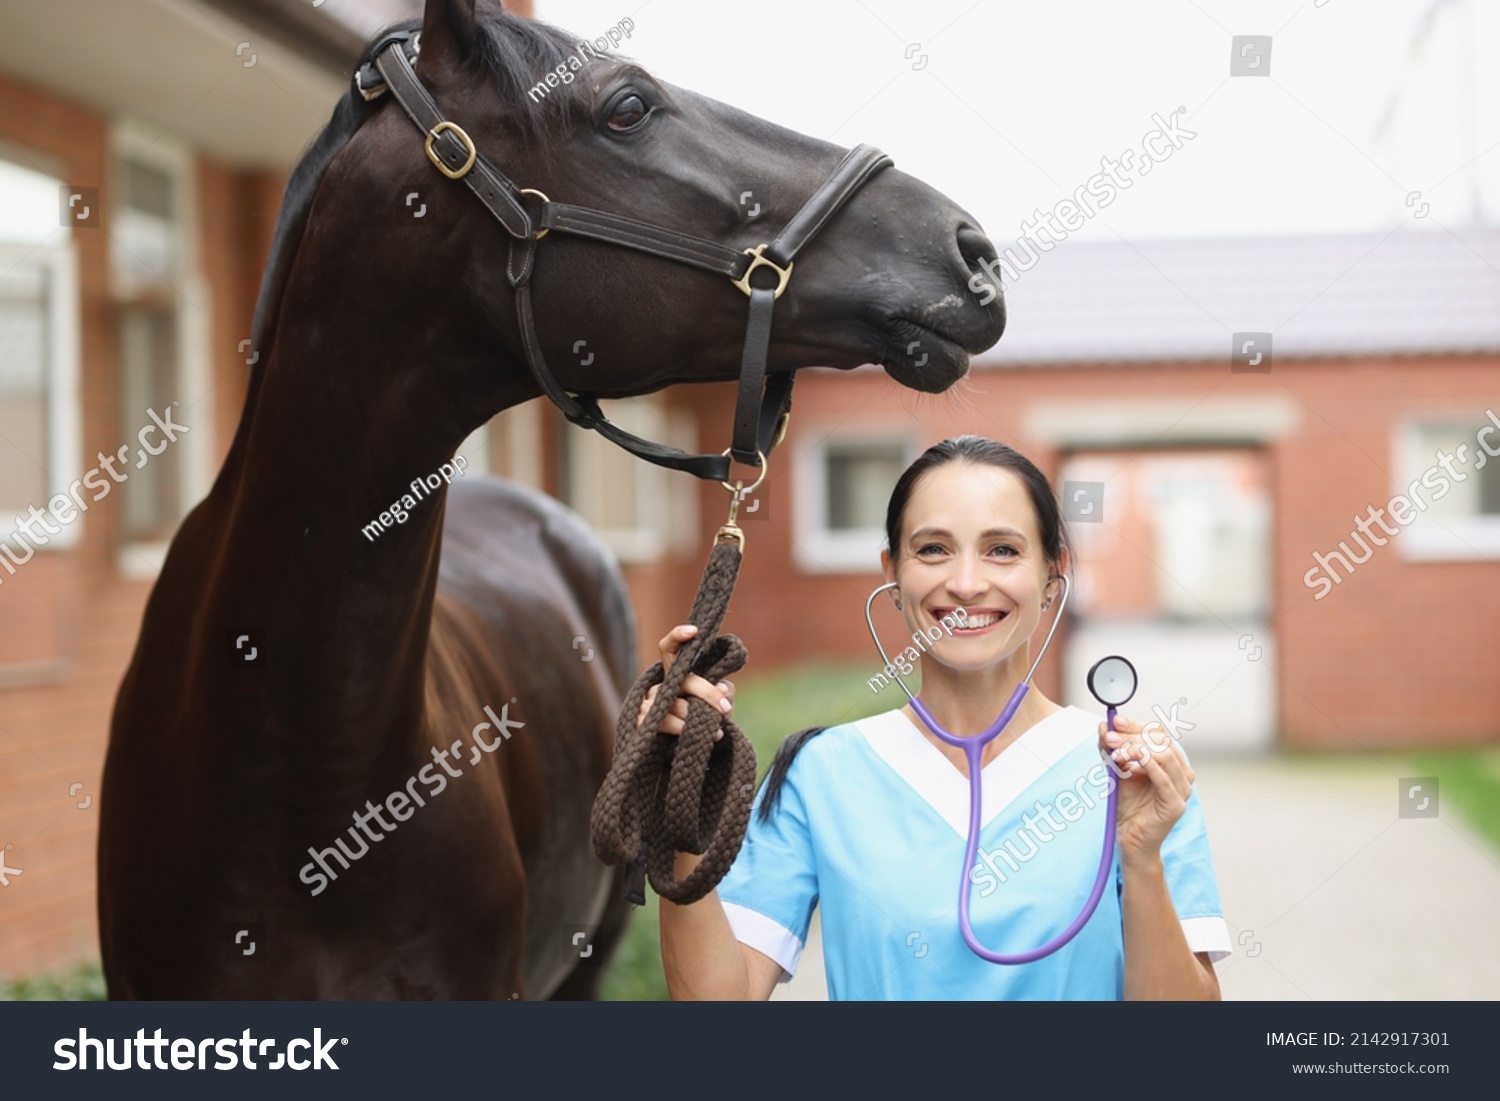 Smiling veterinarian with horse is holding stethoscope. Veterinary services concept #2142917301